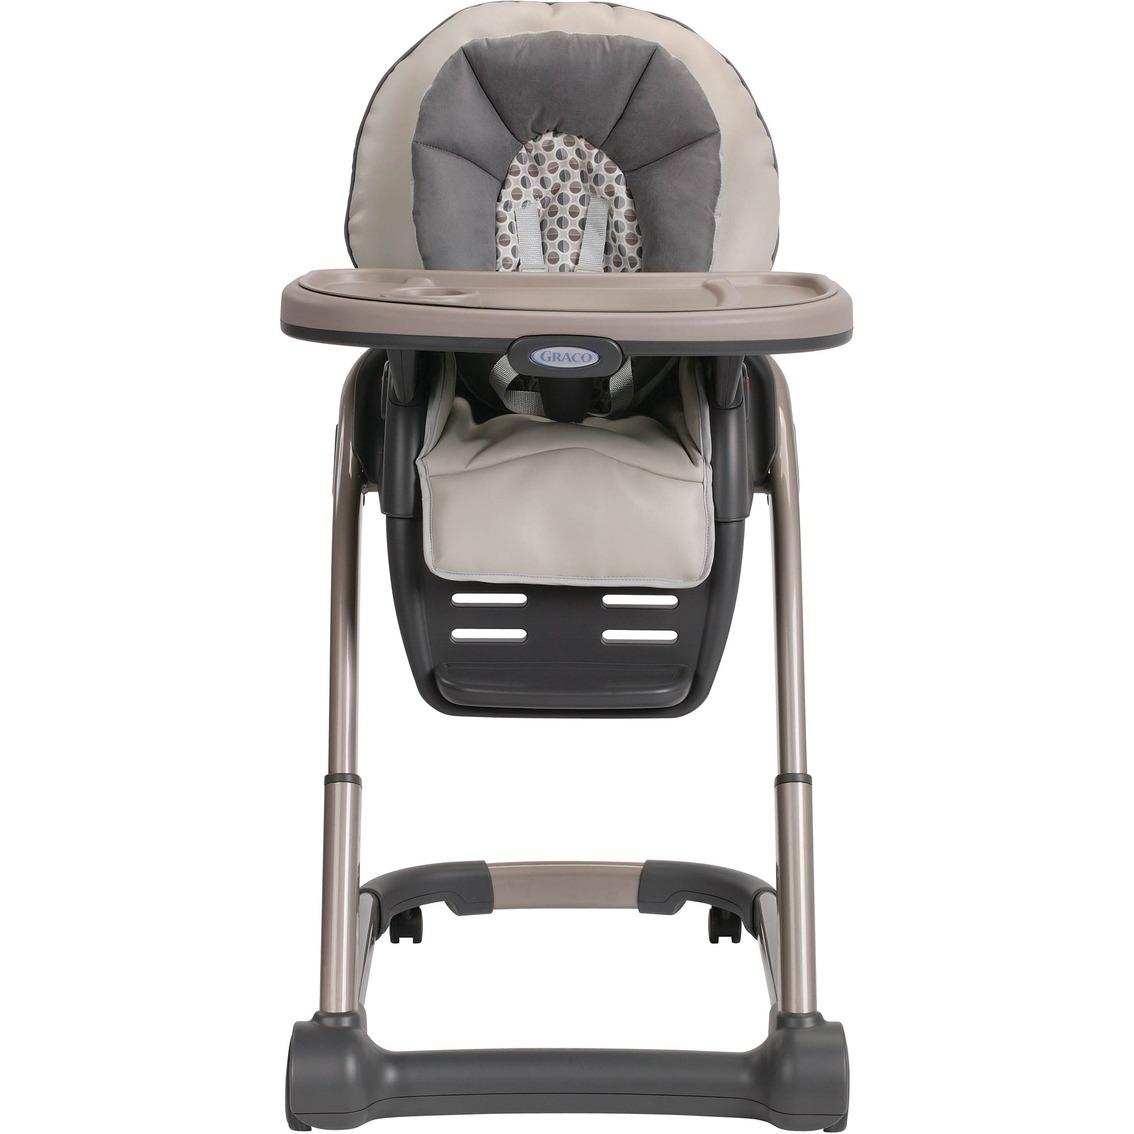 Graco Blossom 4 in 1 Highchair - Image 2 of 3